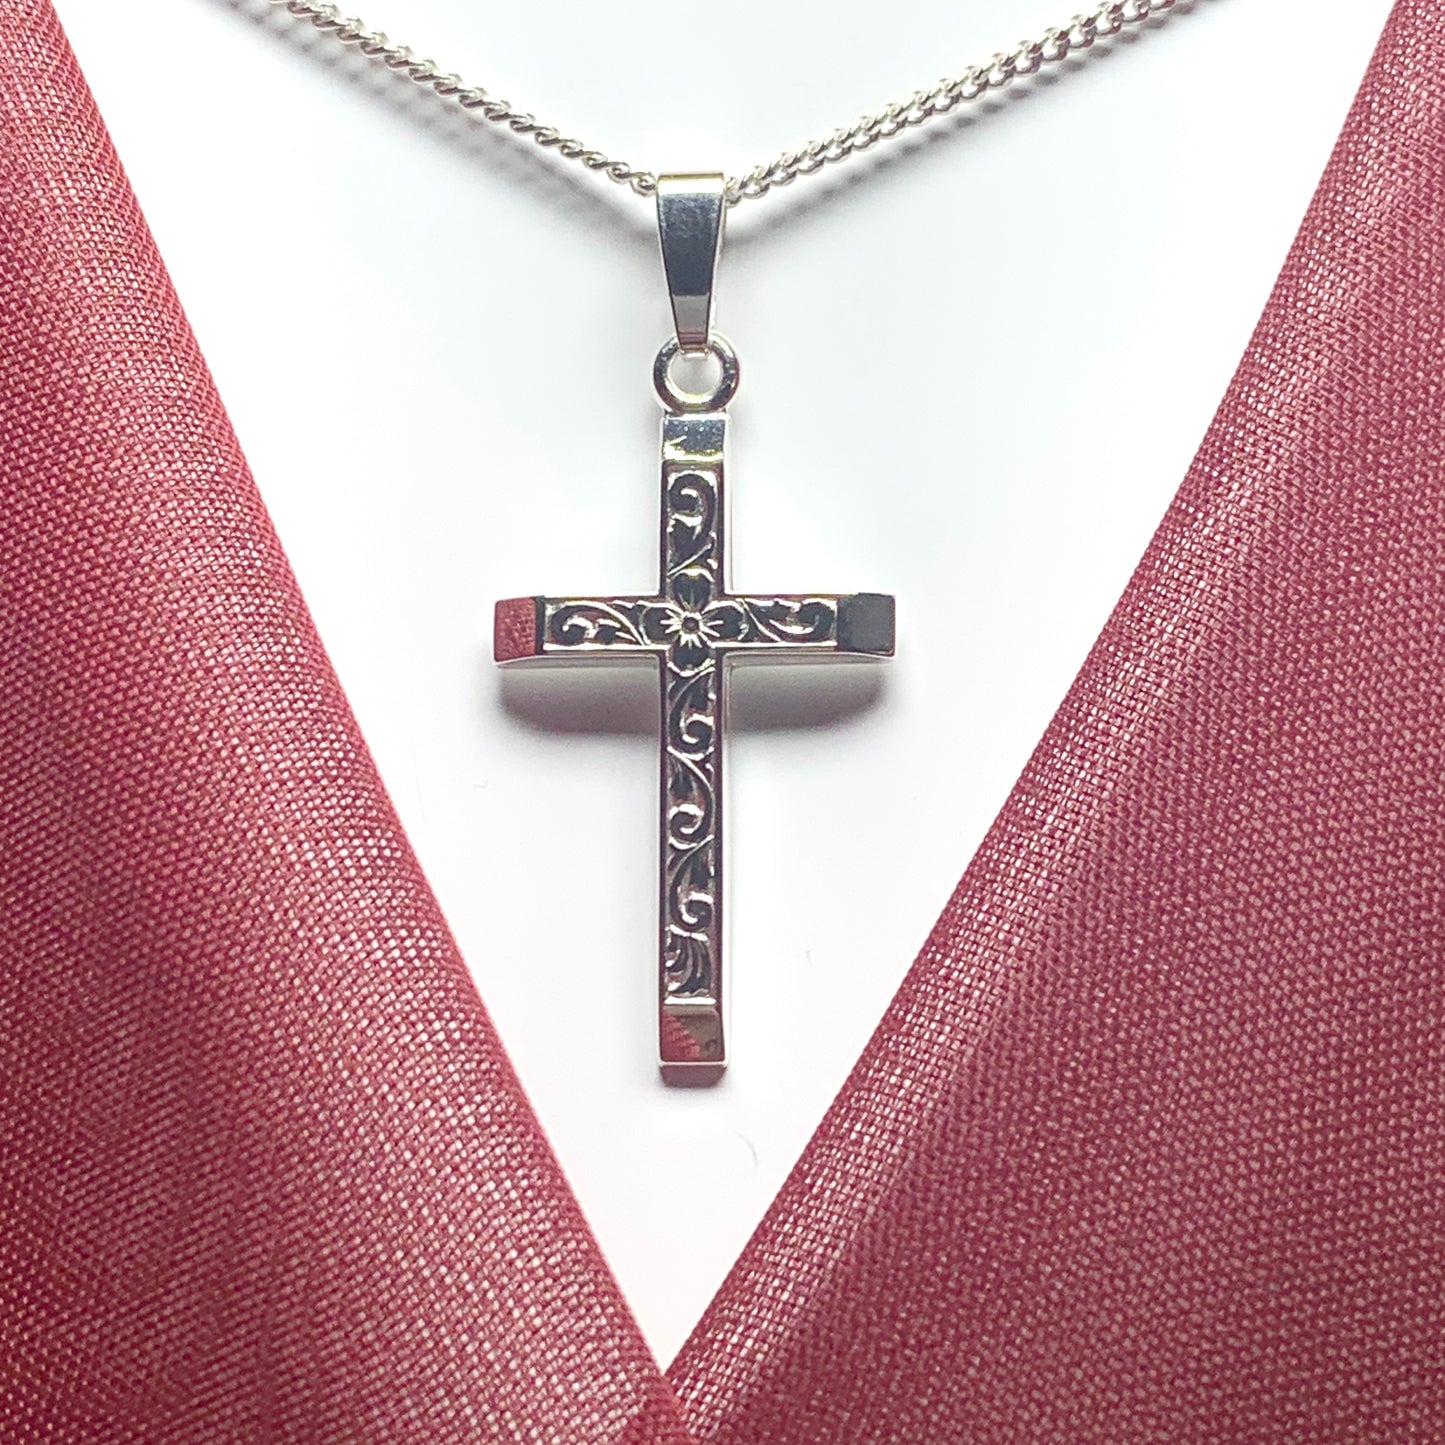 Solid diamond cut cross patterned sterling silver including chain